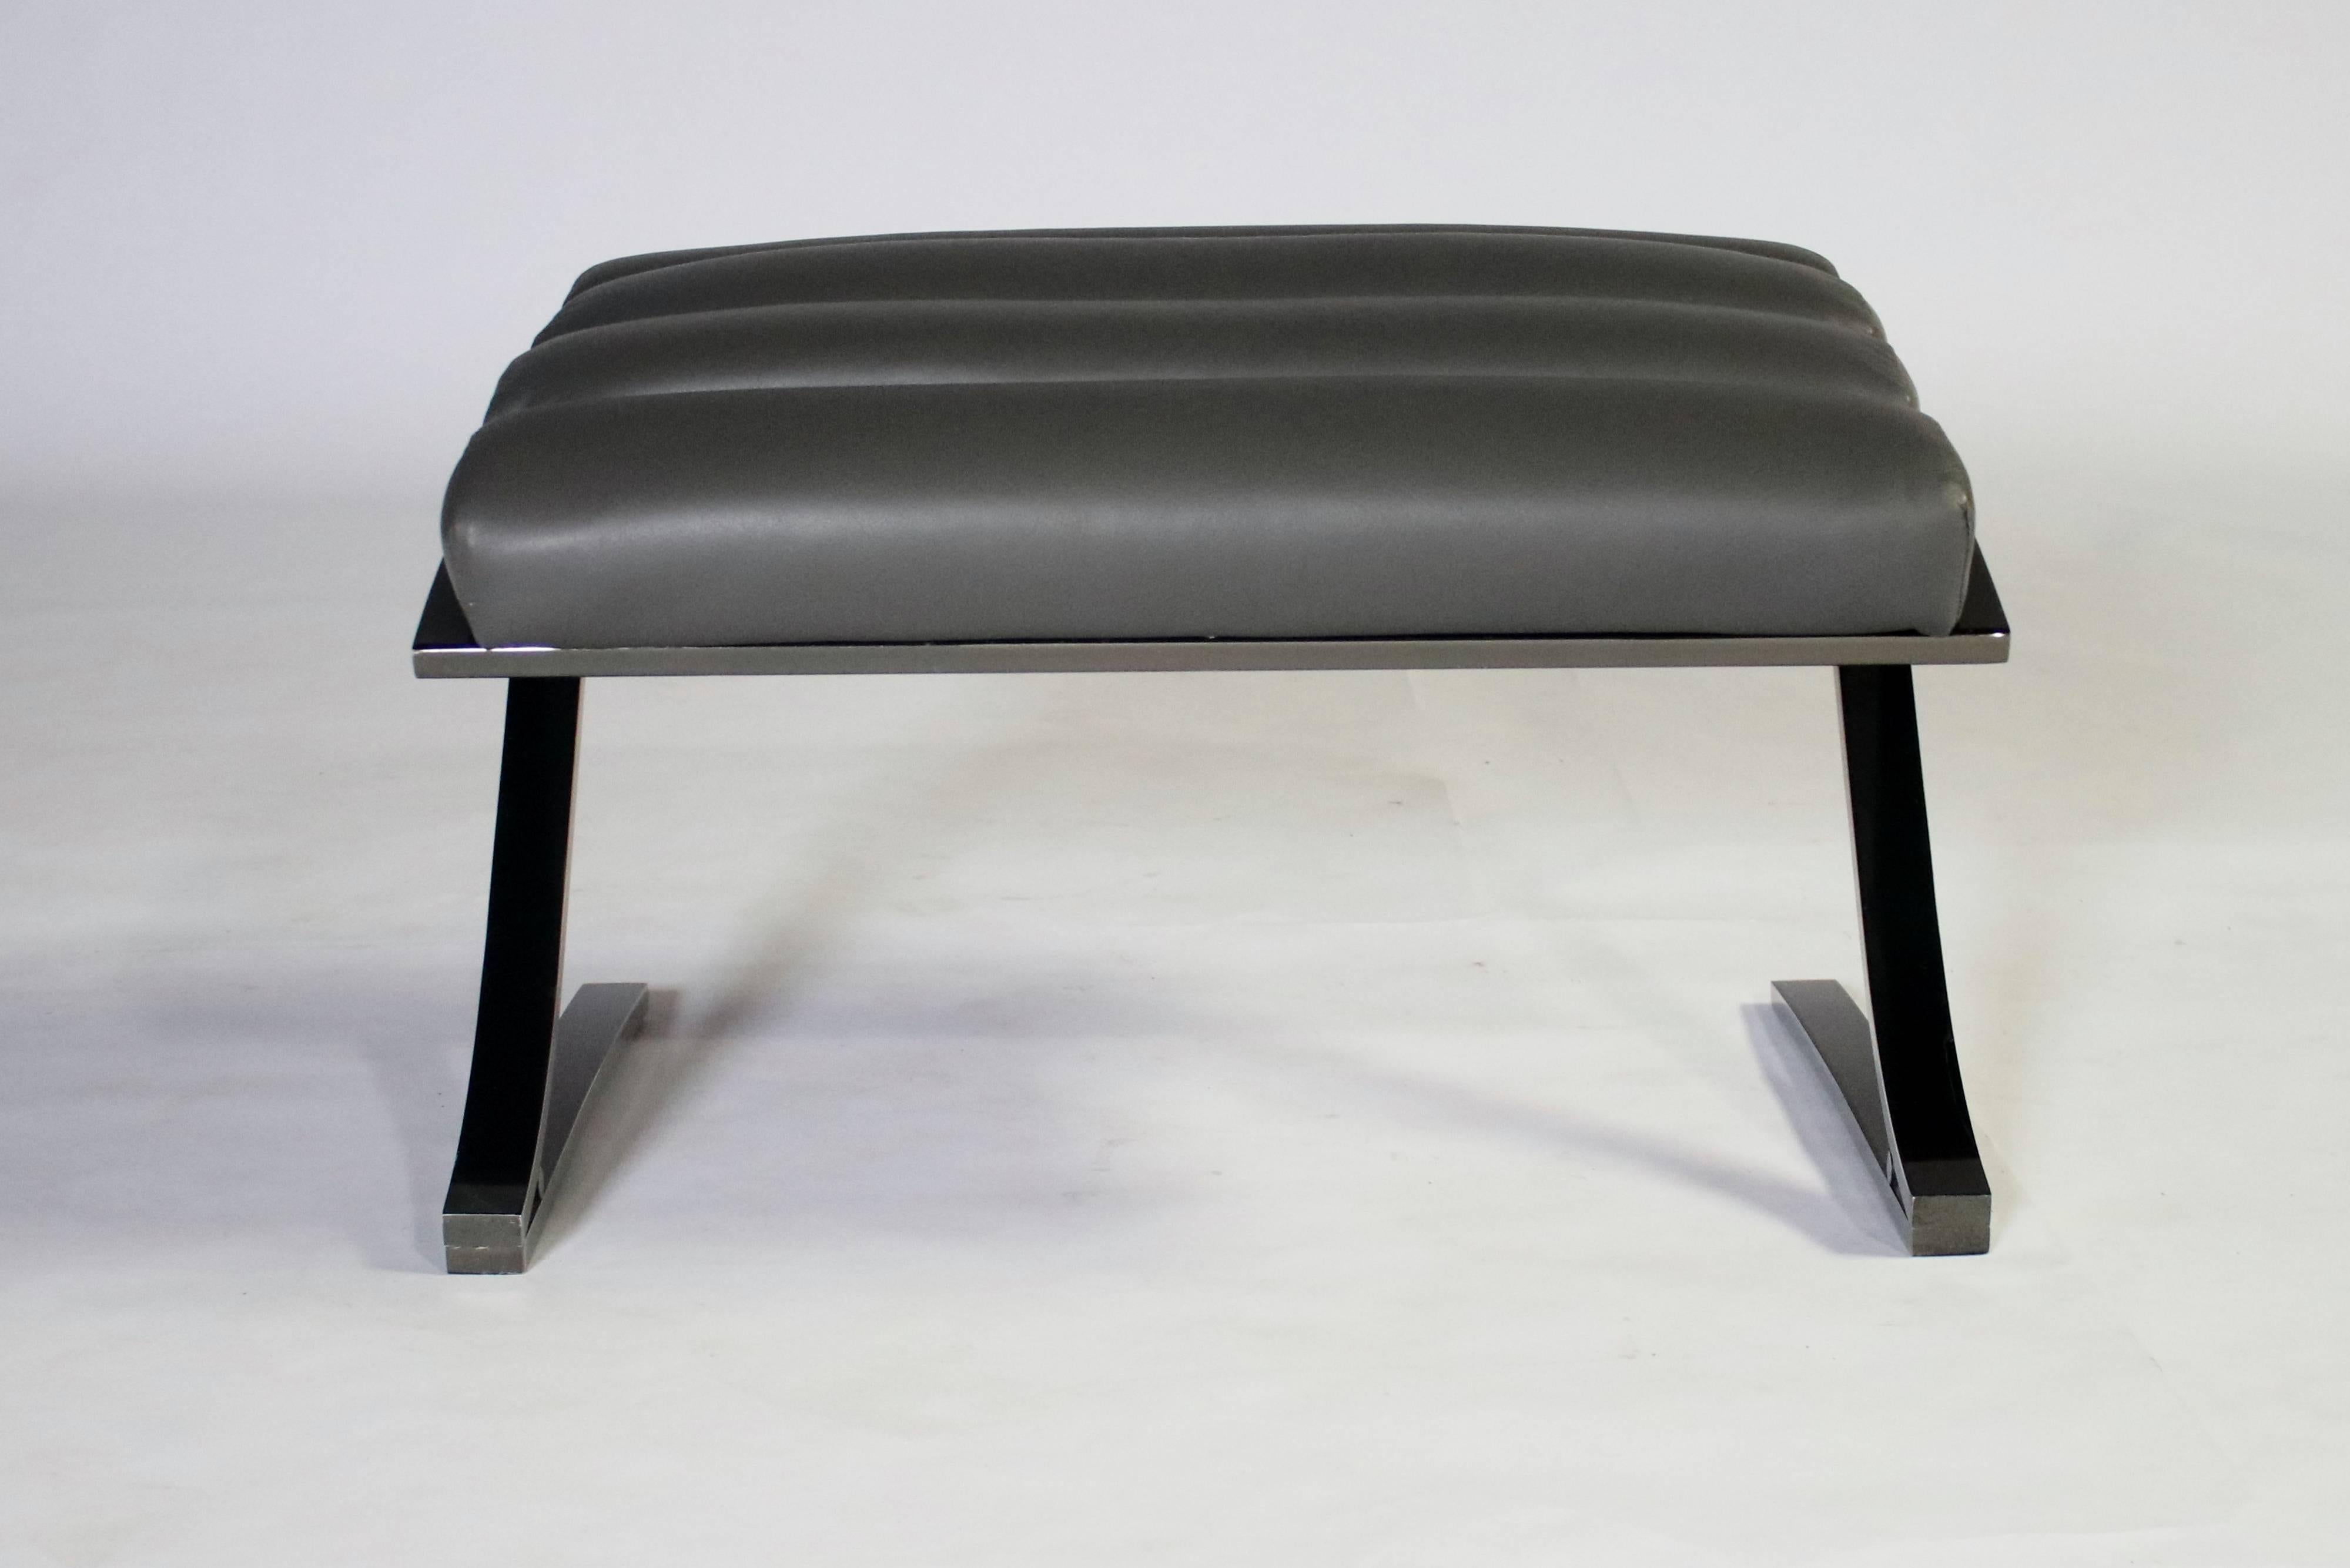 A cantilevered channeled gray leather lounge chair on a smoky- gray polished steel frame with ottoman by Design Institute of America. All newly upholstered leather and steel in excellent condition.
Chair measures 32